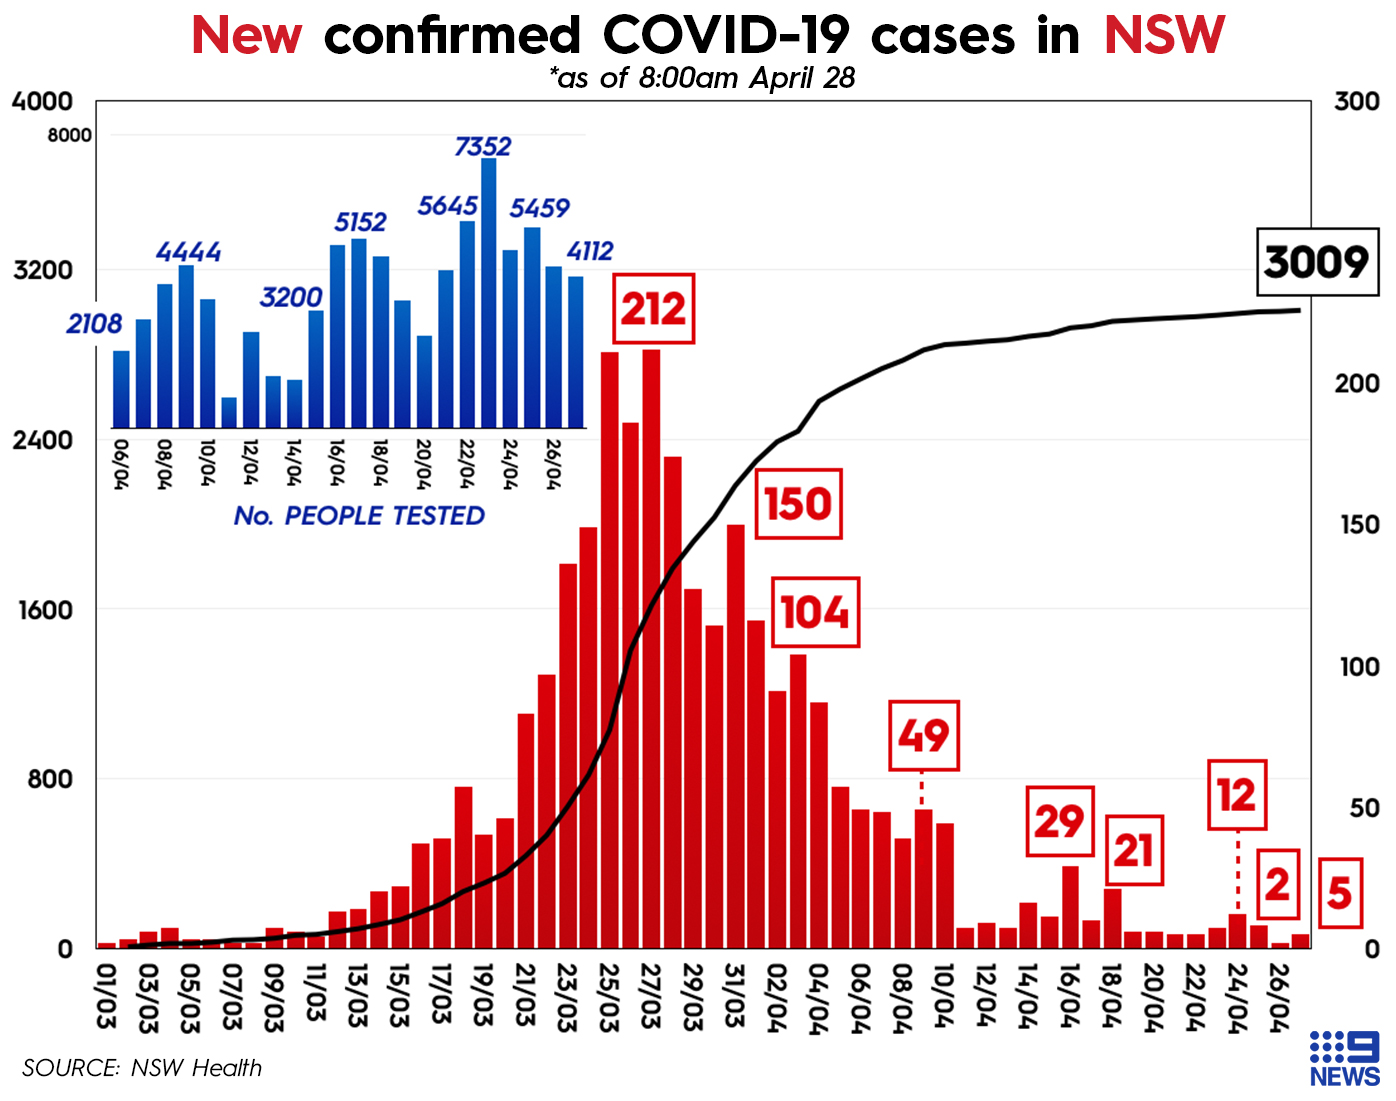 Graph showing daily COVID-19 tests and coronavirus cases in New South Wales, Australia.